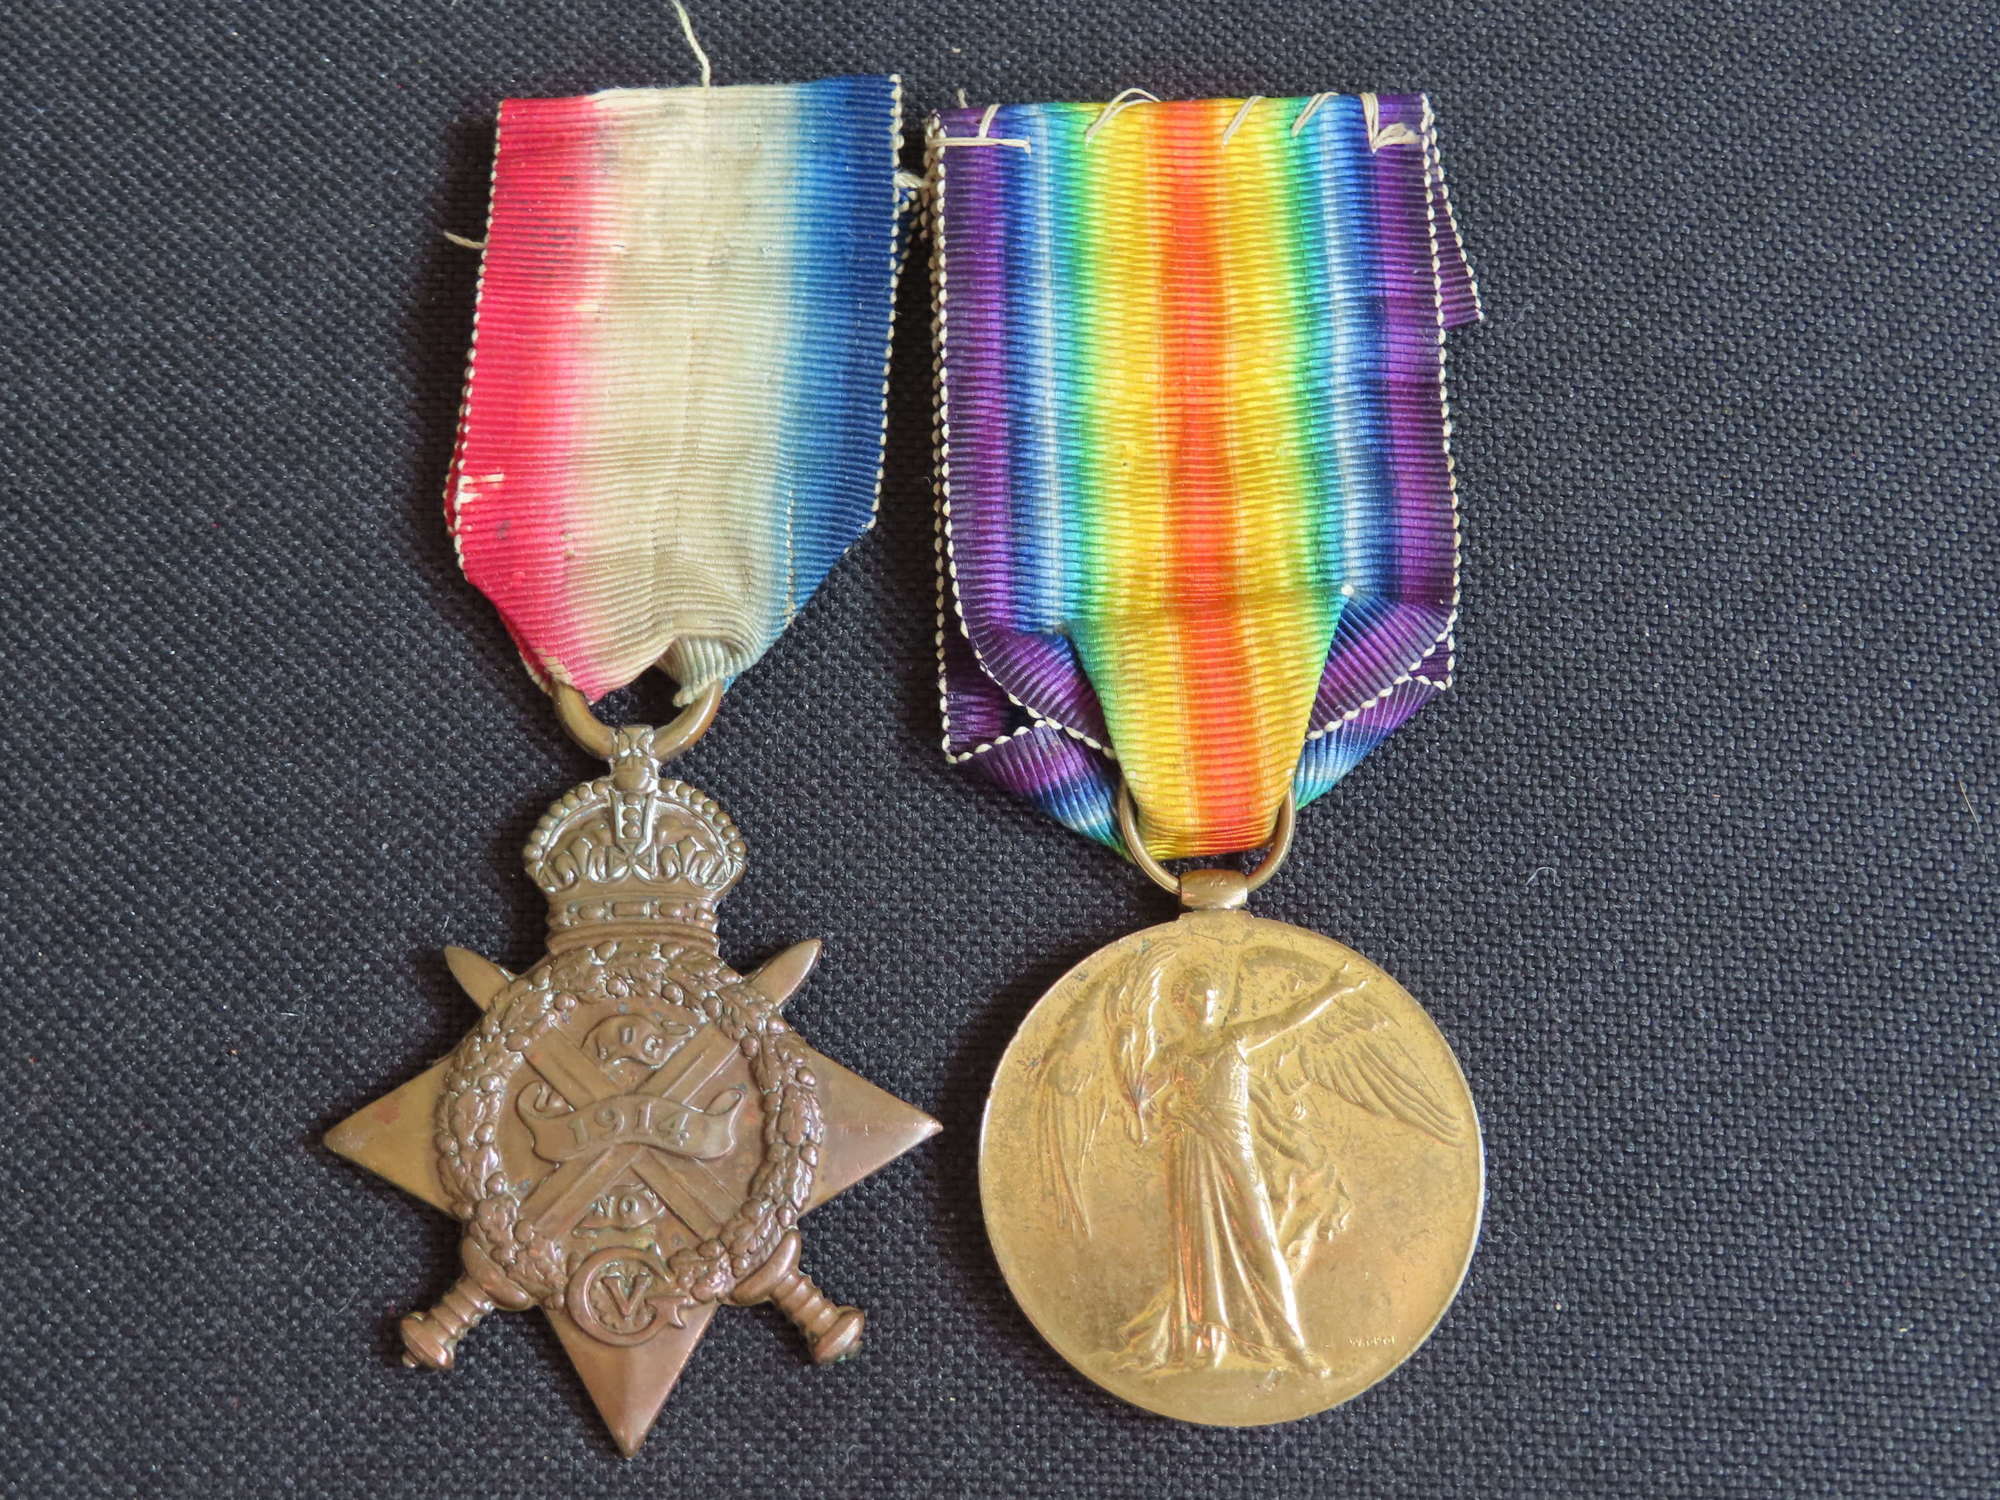 WW1 1914 Star & Victory Medals awarded to V C Carrick R.E.